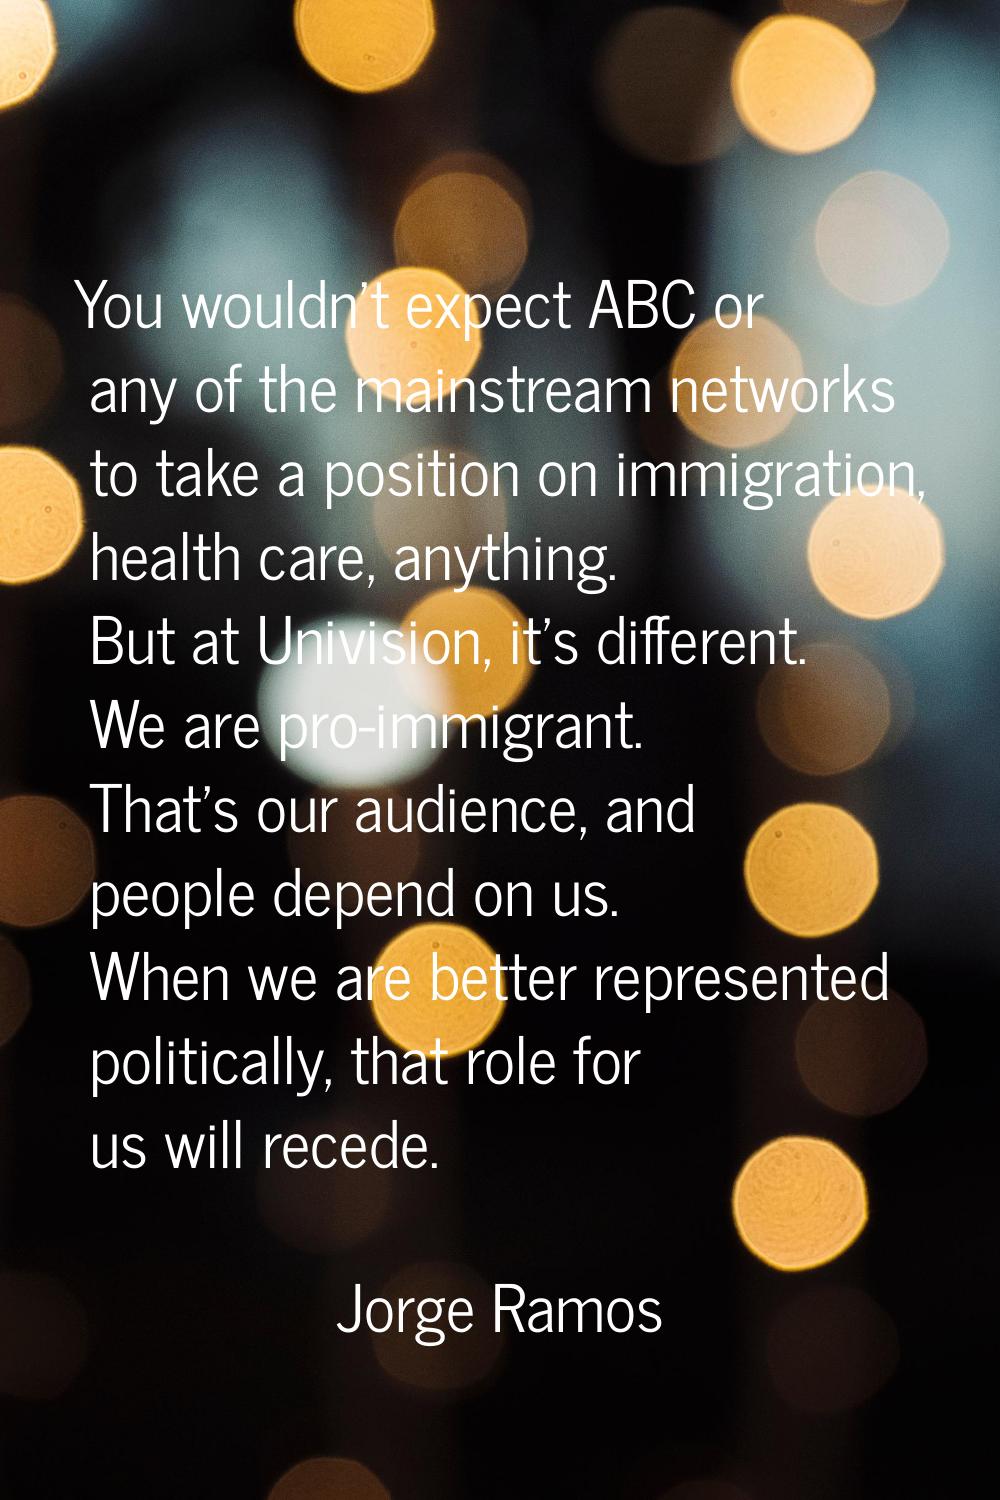 You wouldn't expect ABC or any of the mainstream networks to take a position on immigration, health